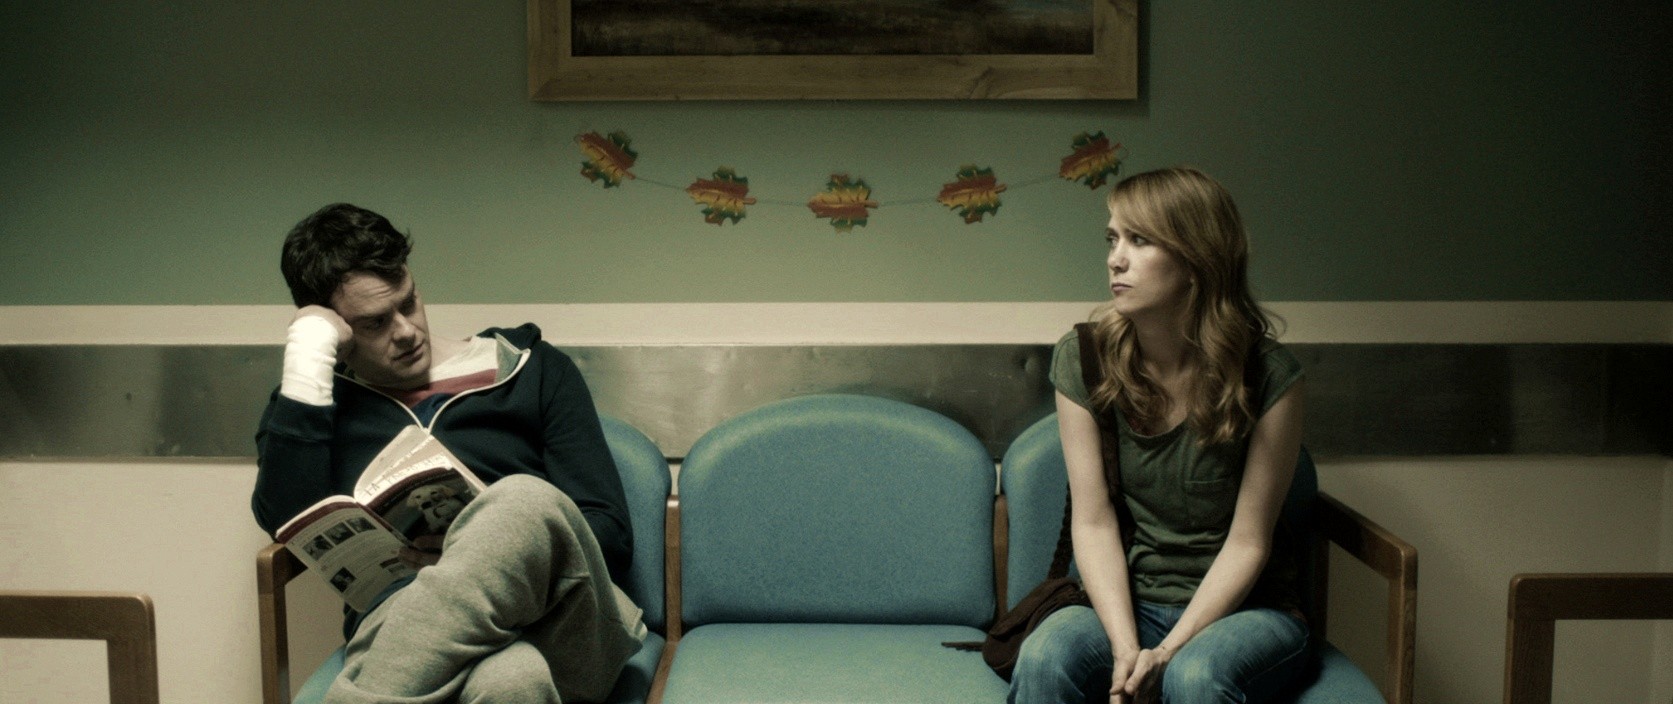 Film Review: “The Skeleton Twins”